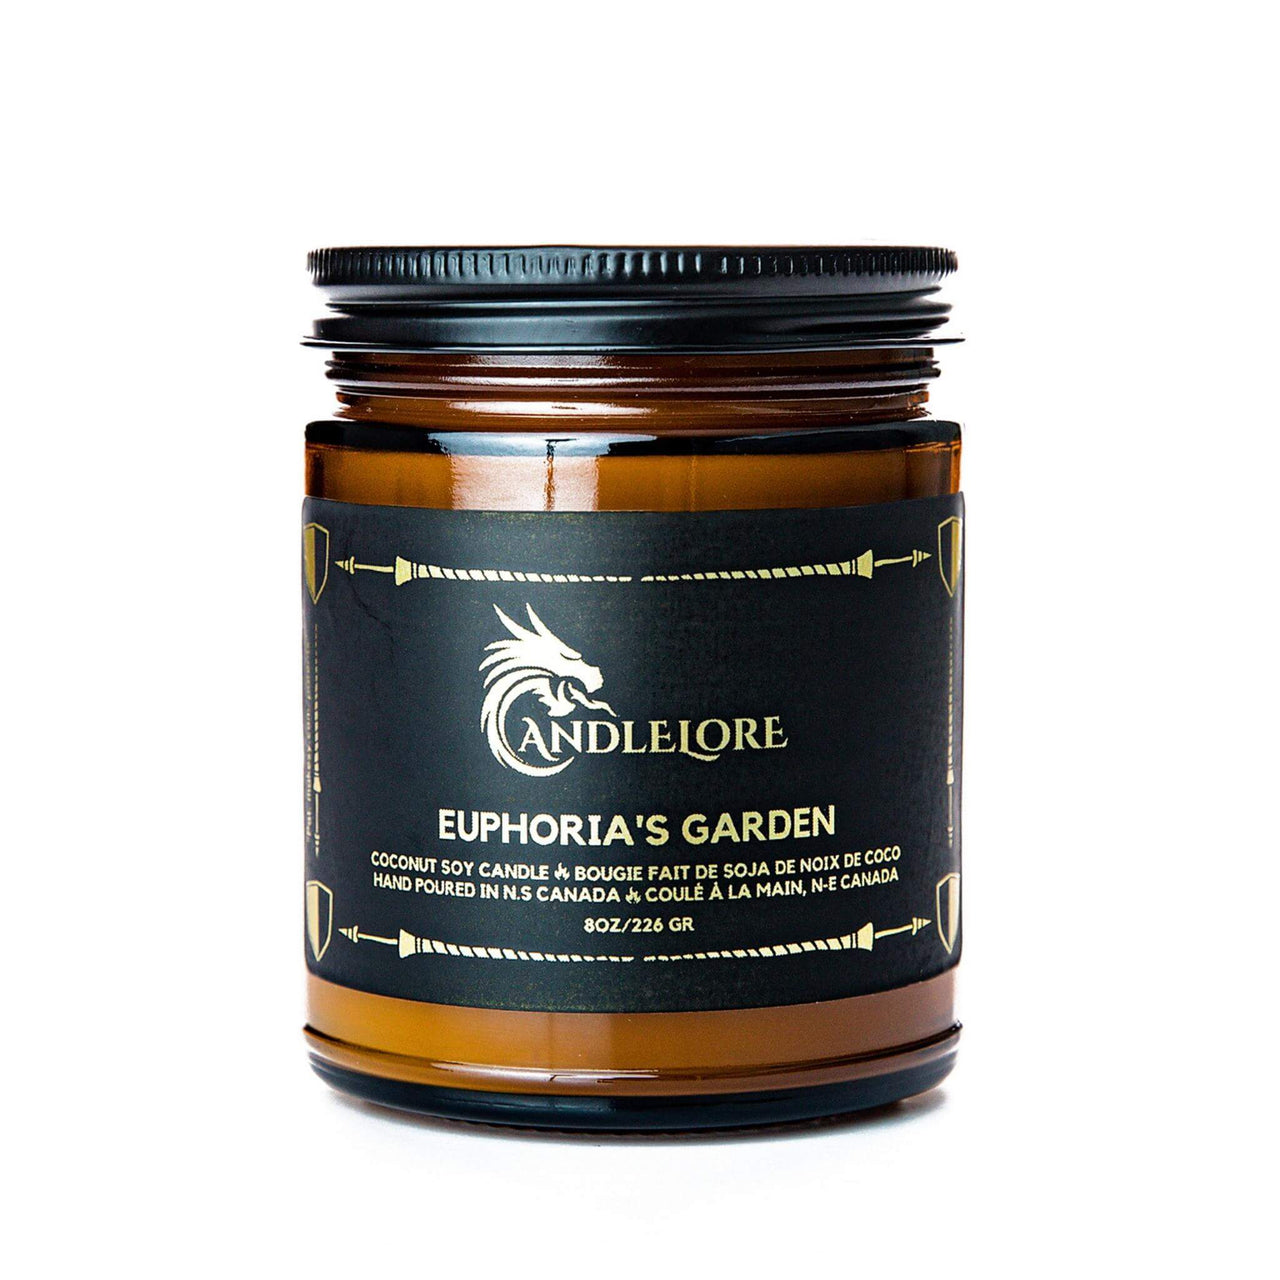 Medium Euphoria's Garden scented candle on a white background